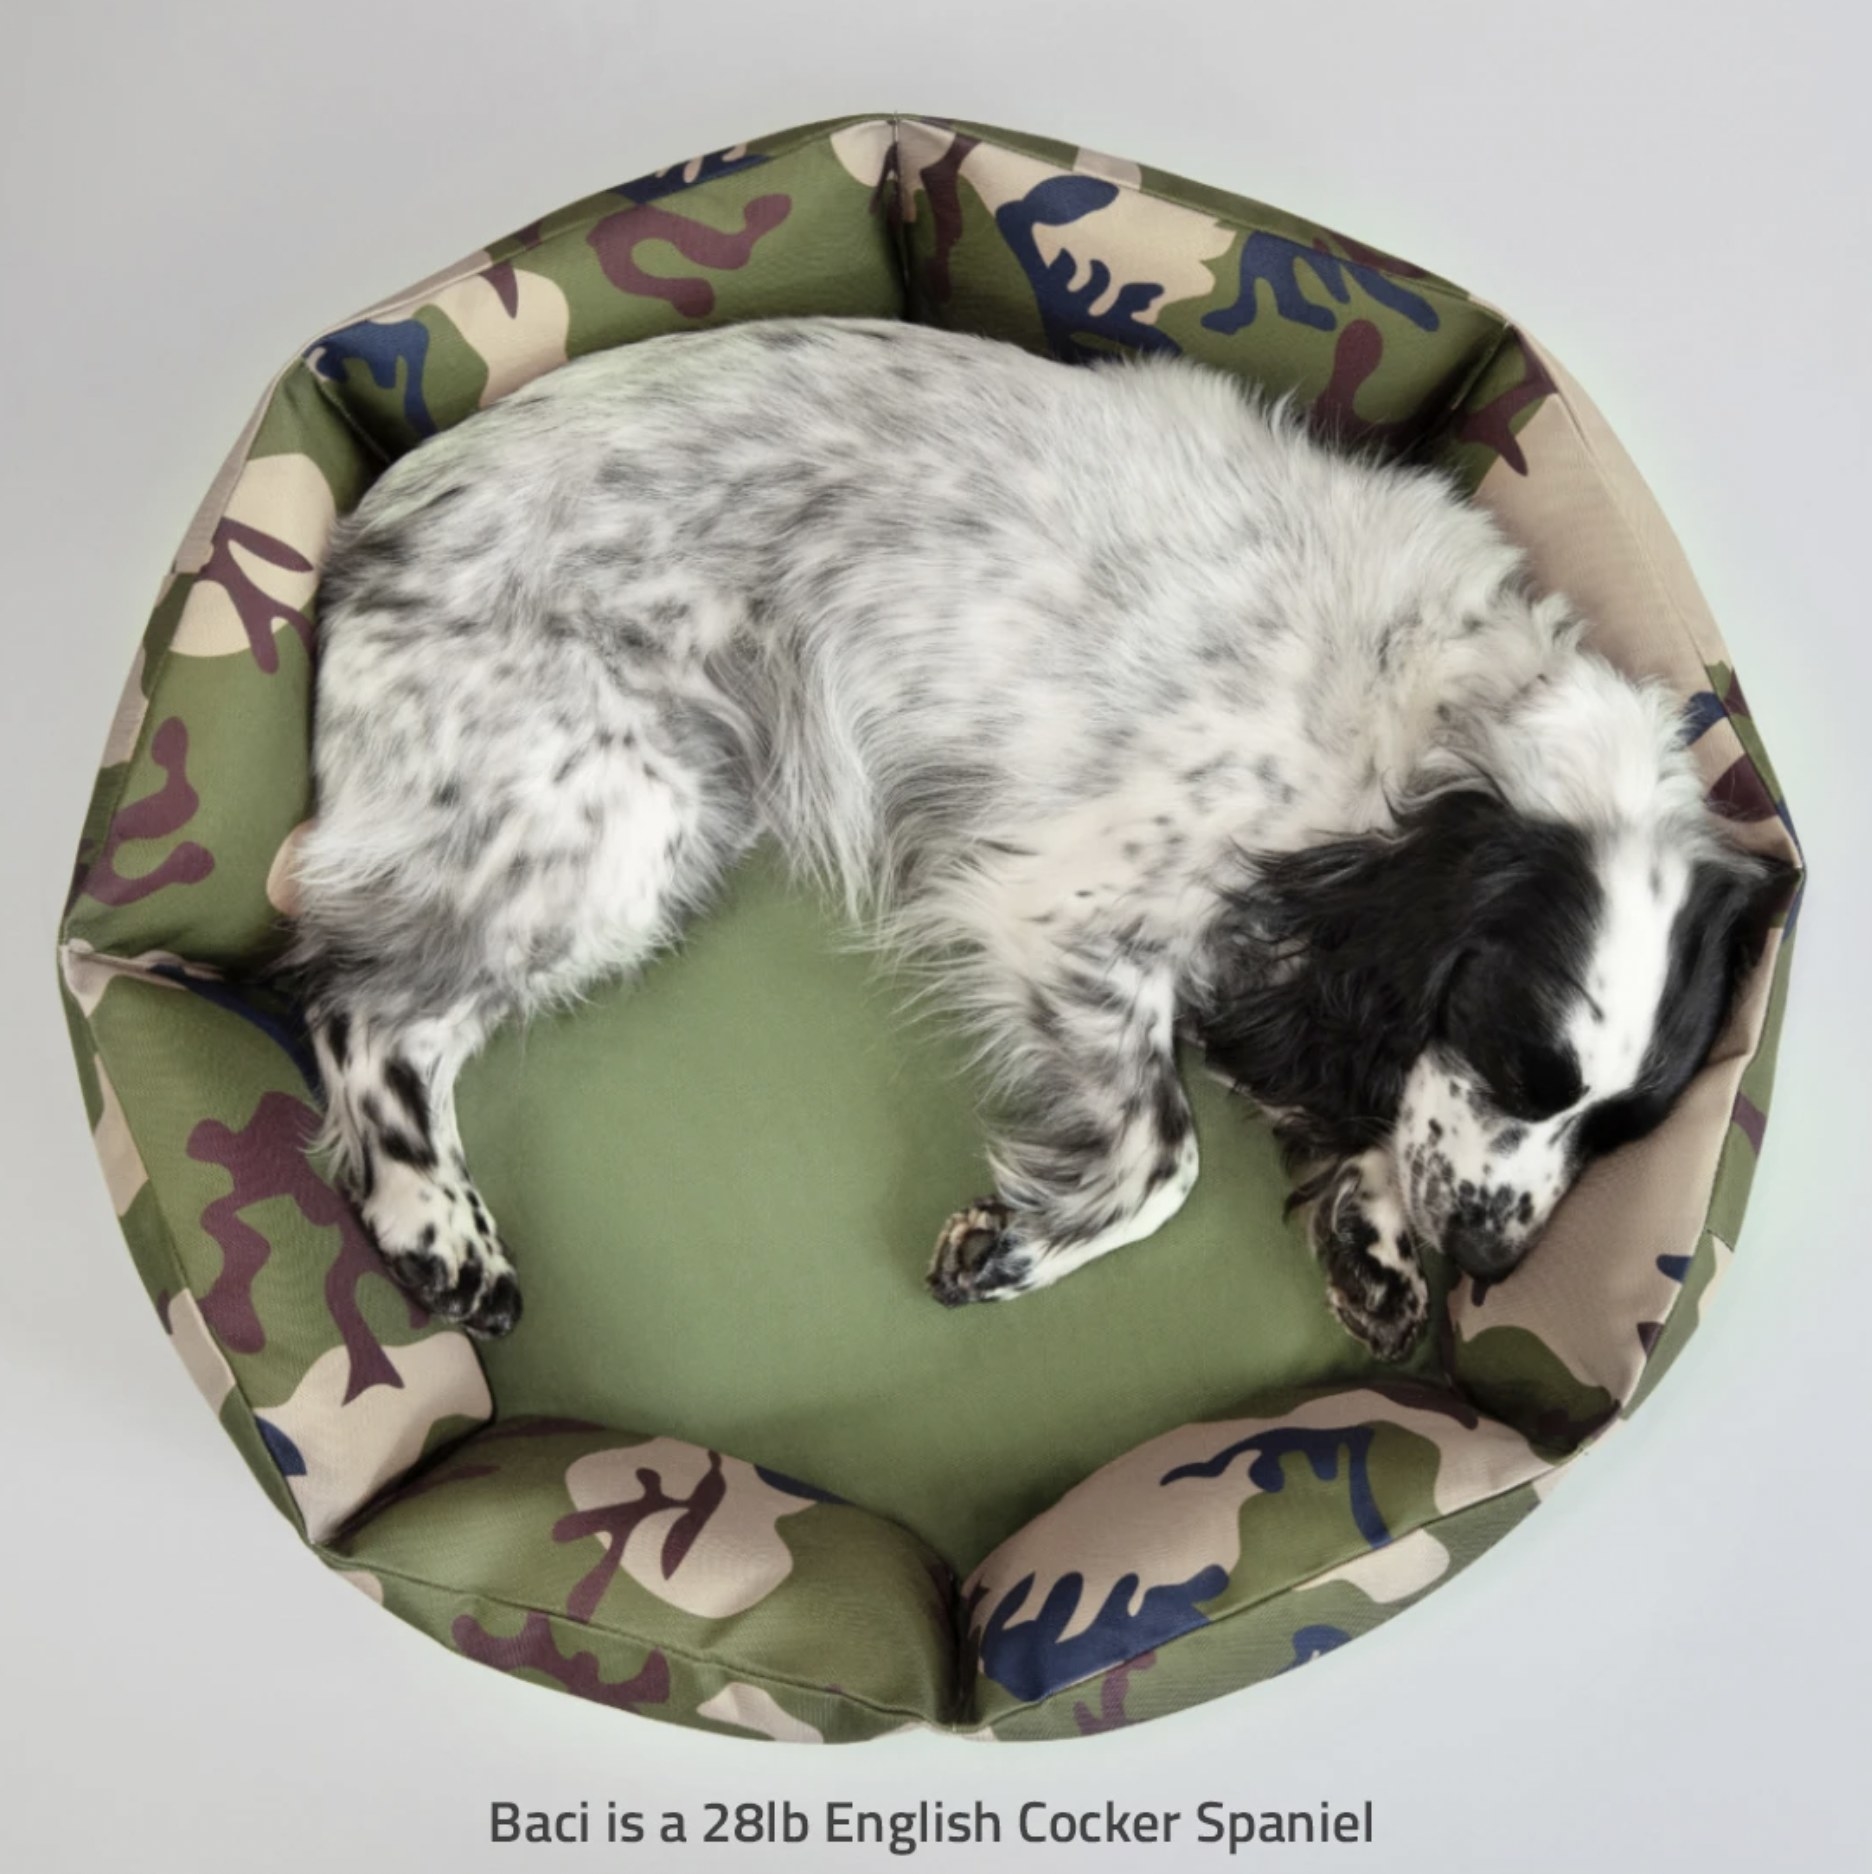 The green camo Roverlund pet bed with a dog in it